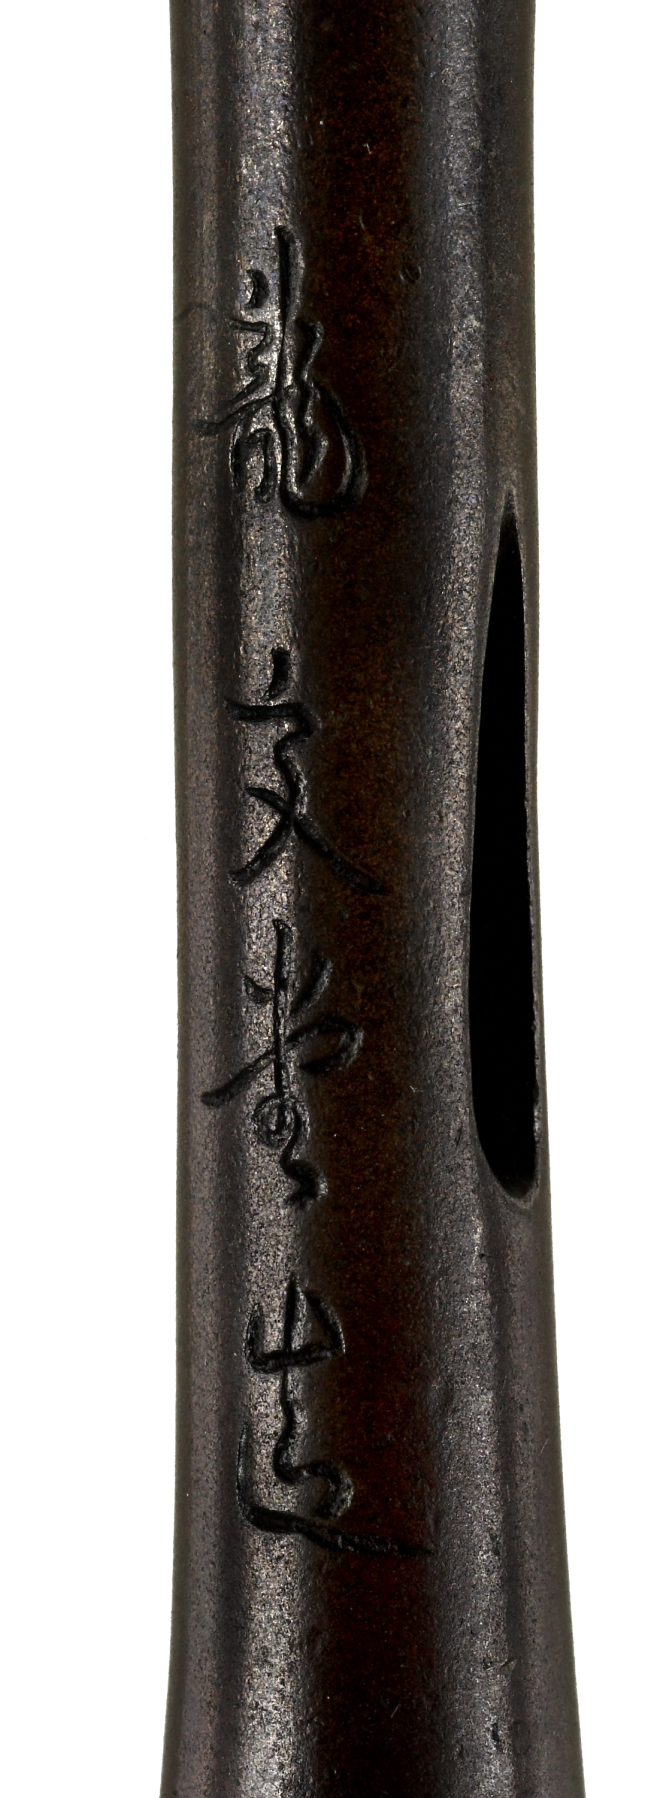 Image for "Yatate" with Etching on Stem and Bowl